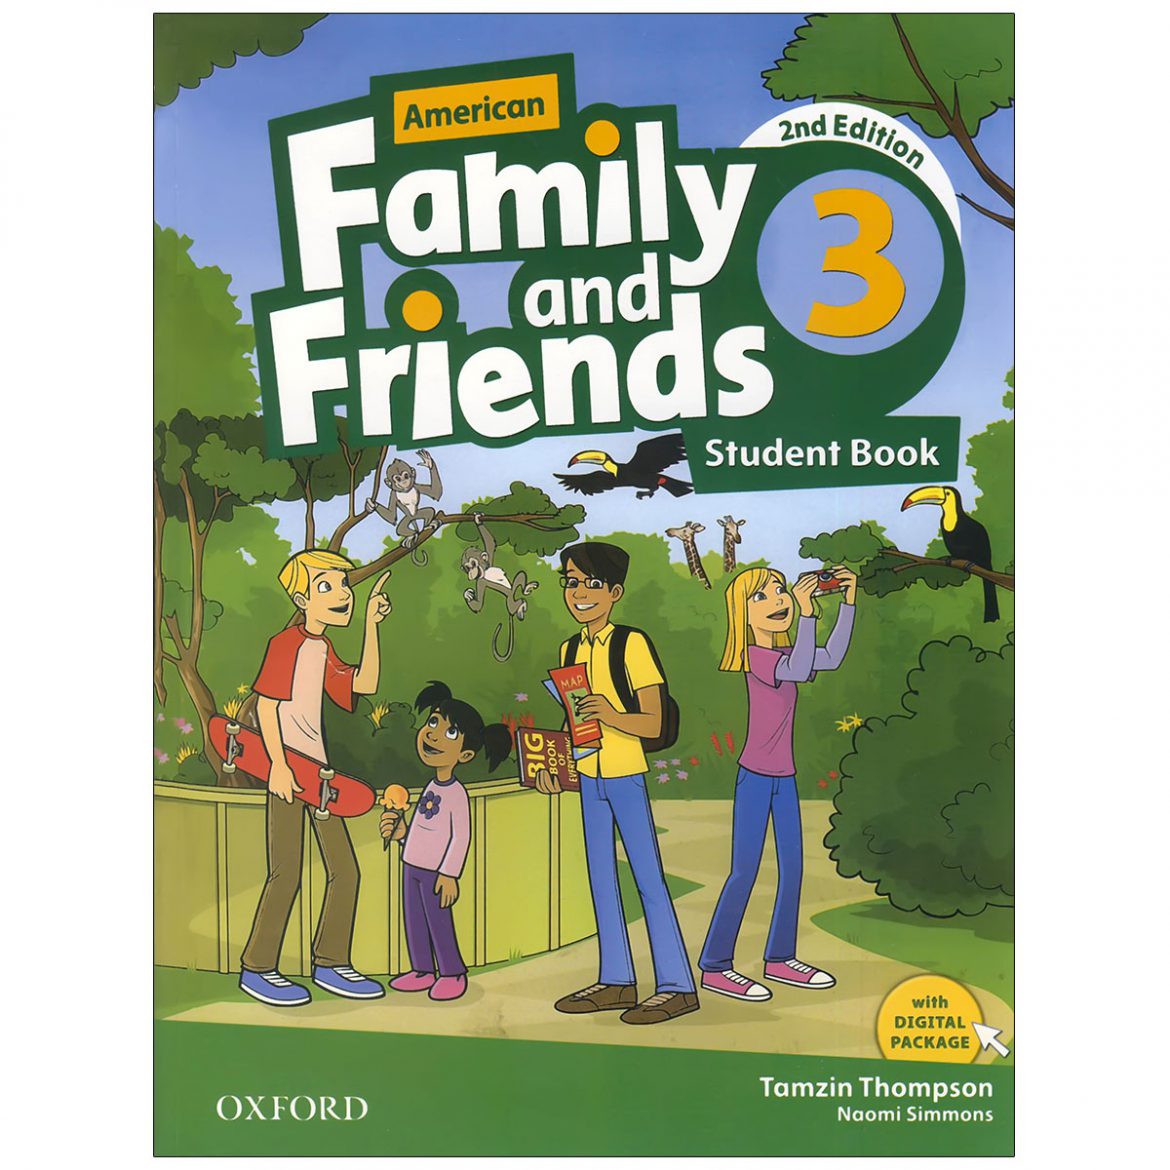 Фэмили френд. Family and friends 2 Edition Classbook. 2nd Edition Family friends Workbook Oxford Naomi Simmons. Oxford Family and friends 3. Family and friends 3 class book.